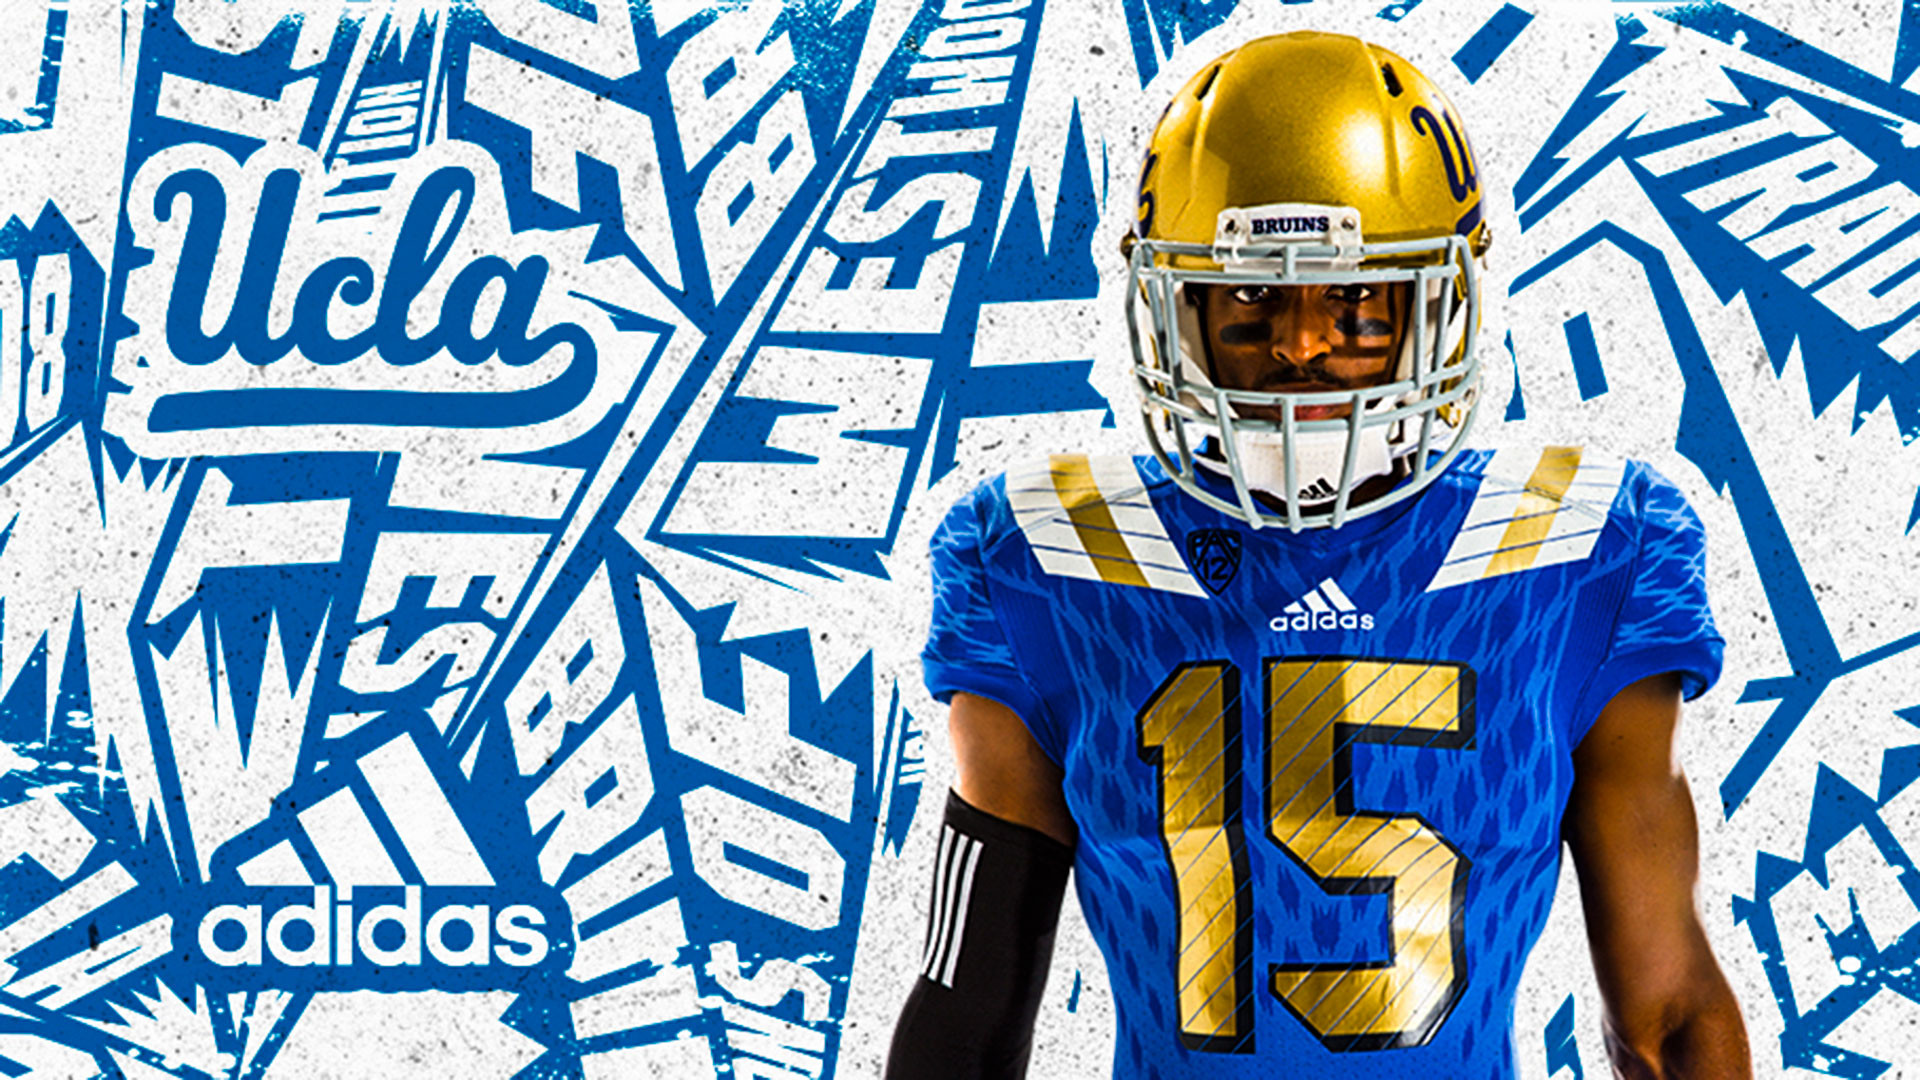 1920x1080 UCLA, adidas unveil new Bruins Primeknit core uniforms for Sept. 5 opener |  Sporting News